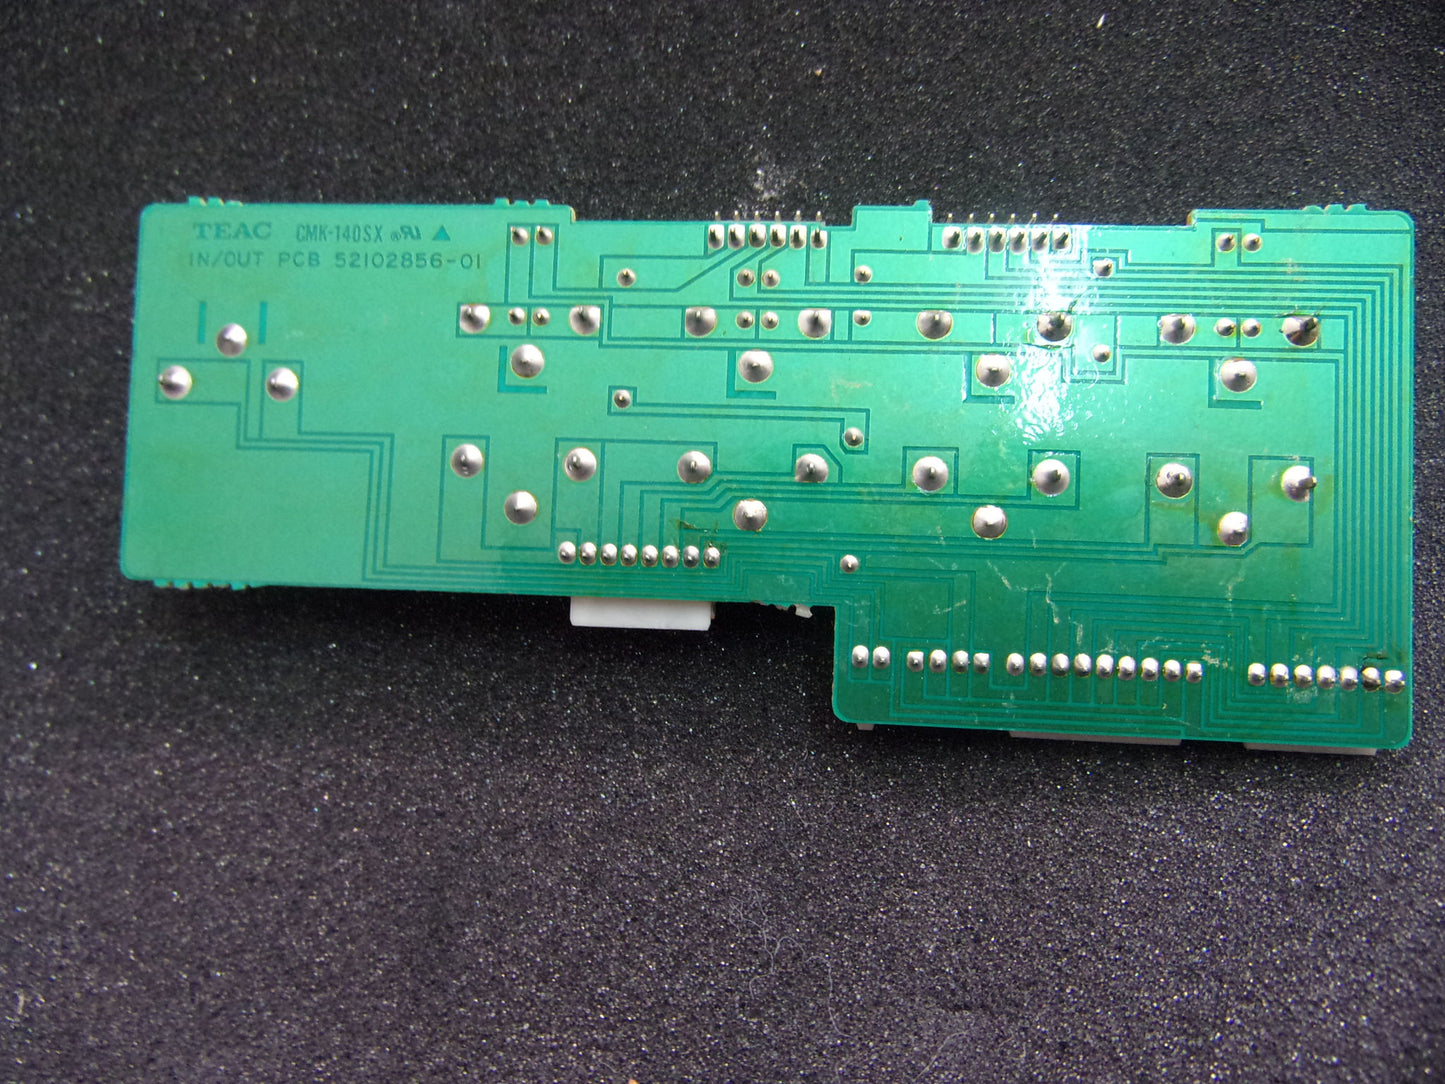 TASCAM 688 IN OUT PCB 52102856-01